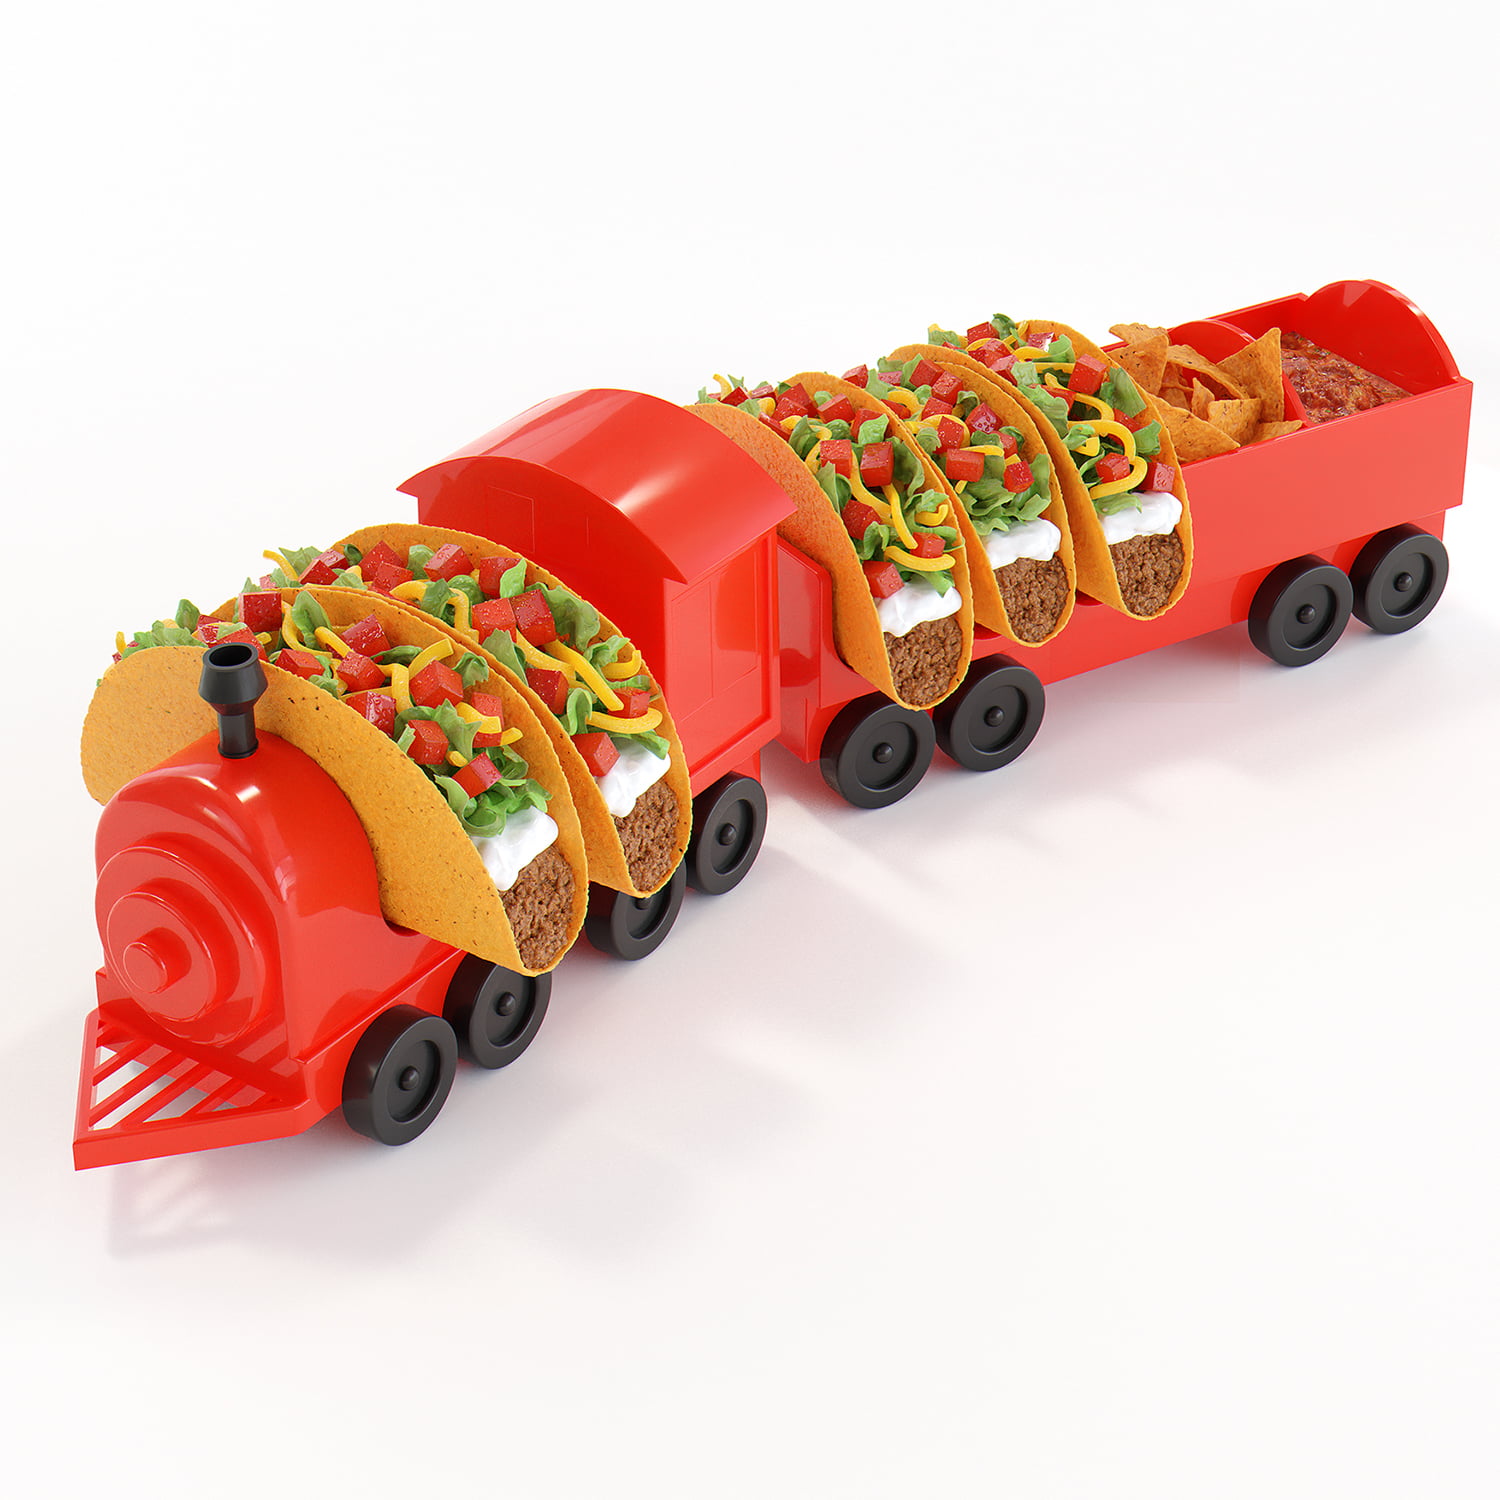 Taco Train Novelty Kitchen Dish 3 Taco Holder in Colorful Train Engine and Cars Fun for Kids and Adults |Taco Tuesday and Party Supplies Mr Crunchy and Soft Taco Stand Server 